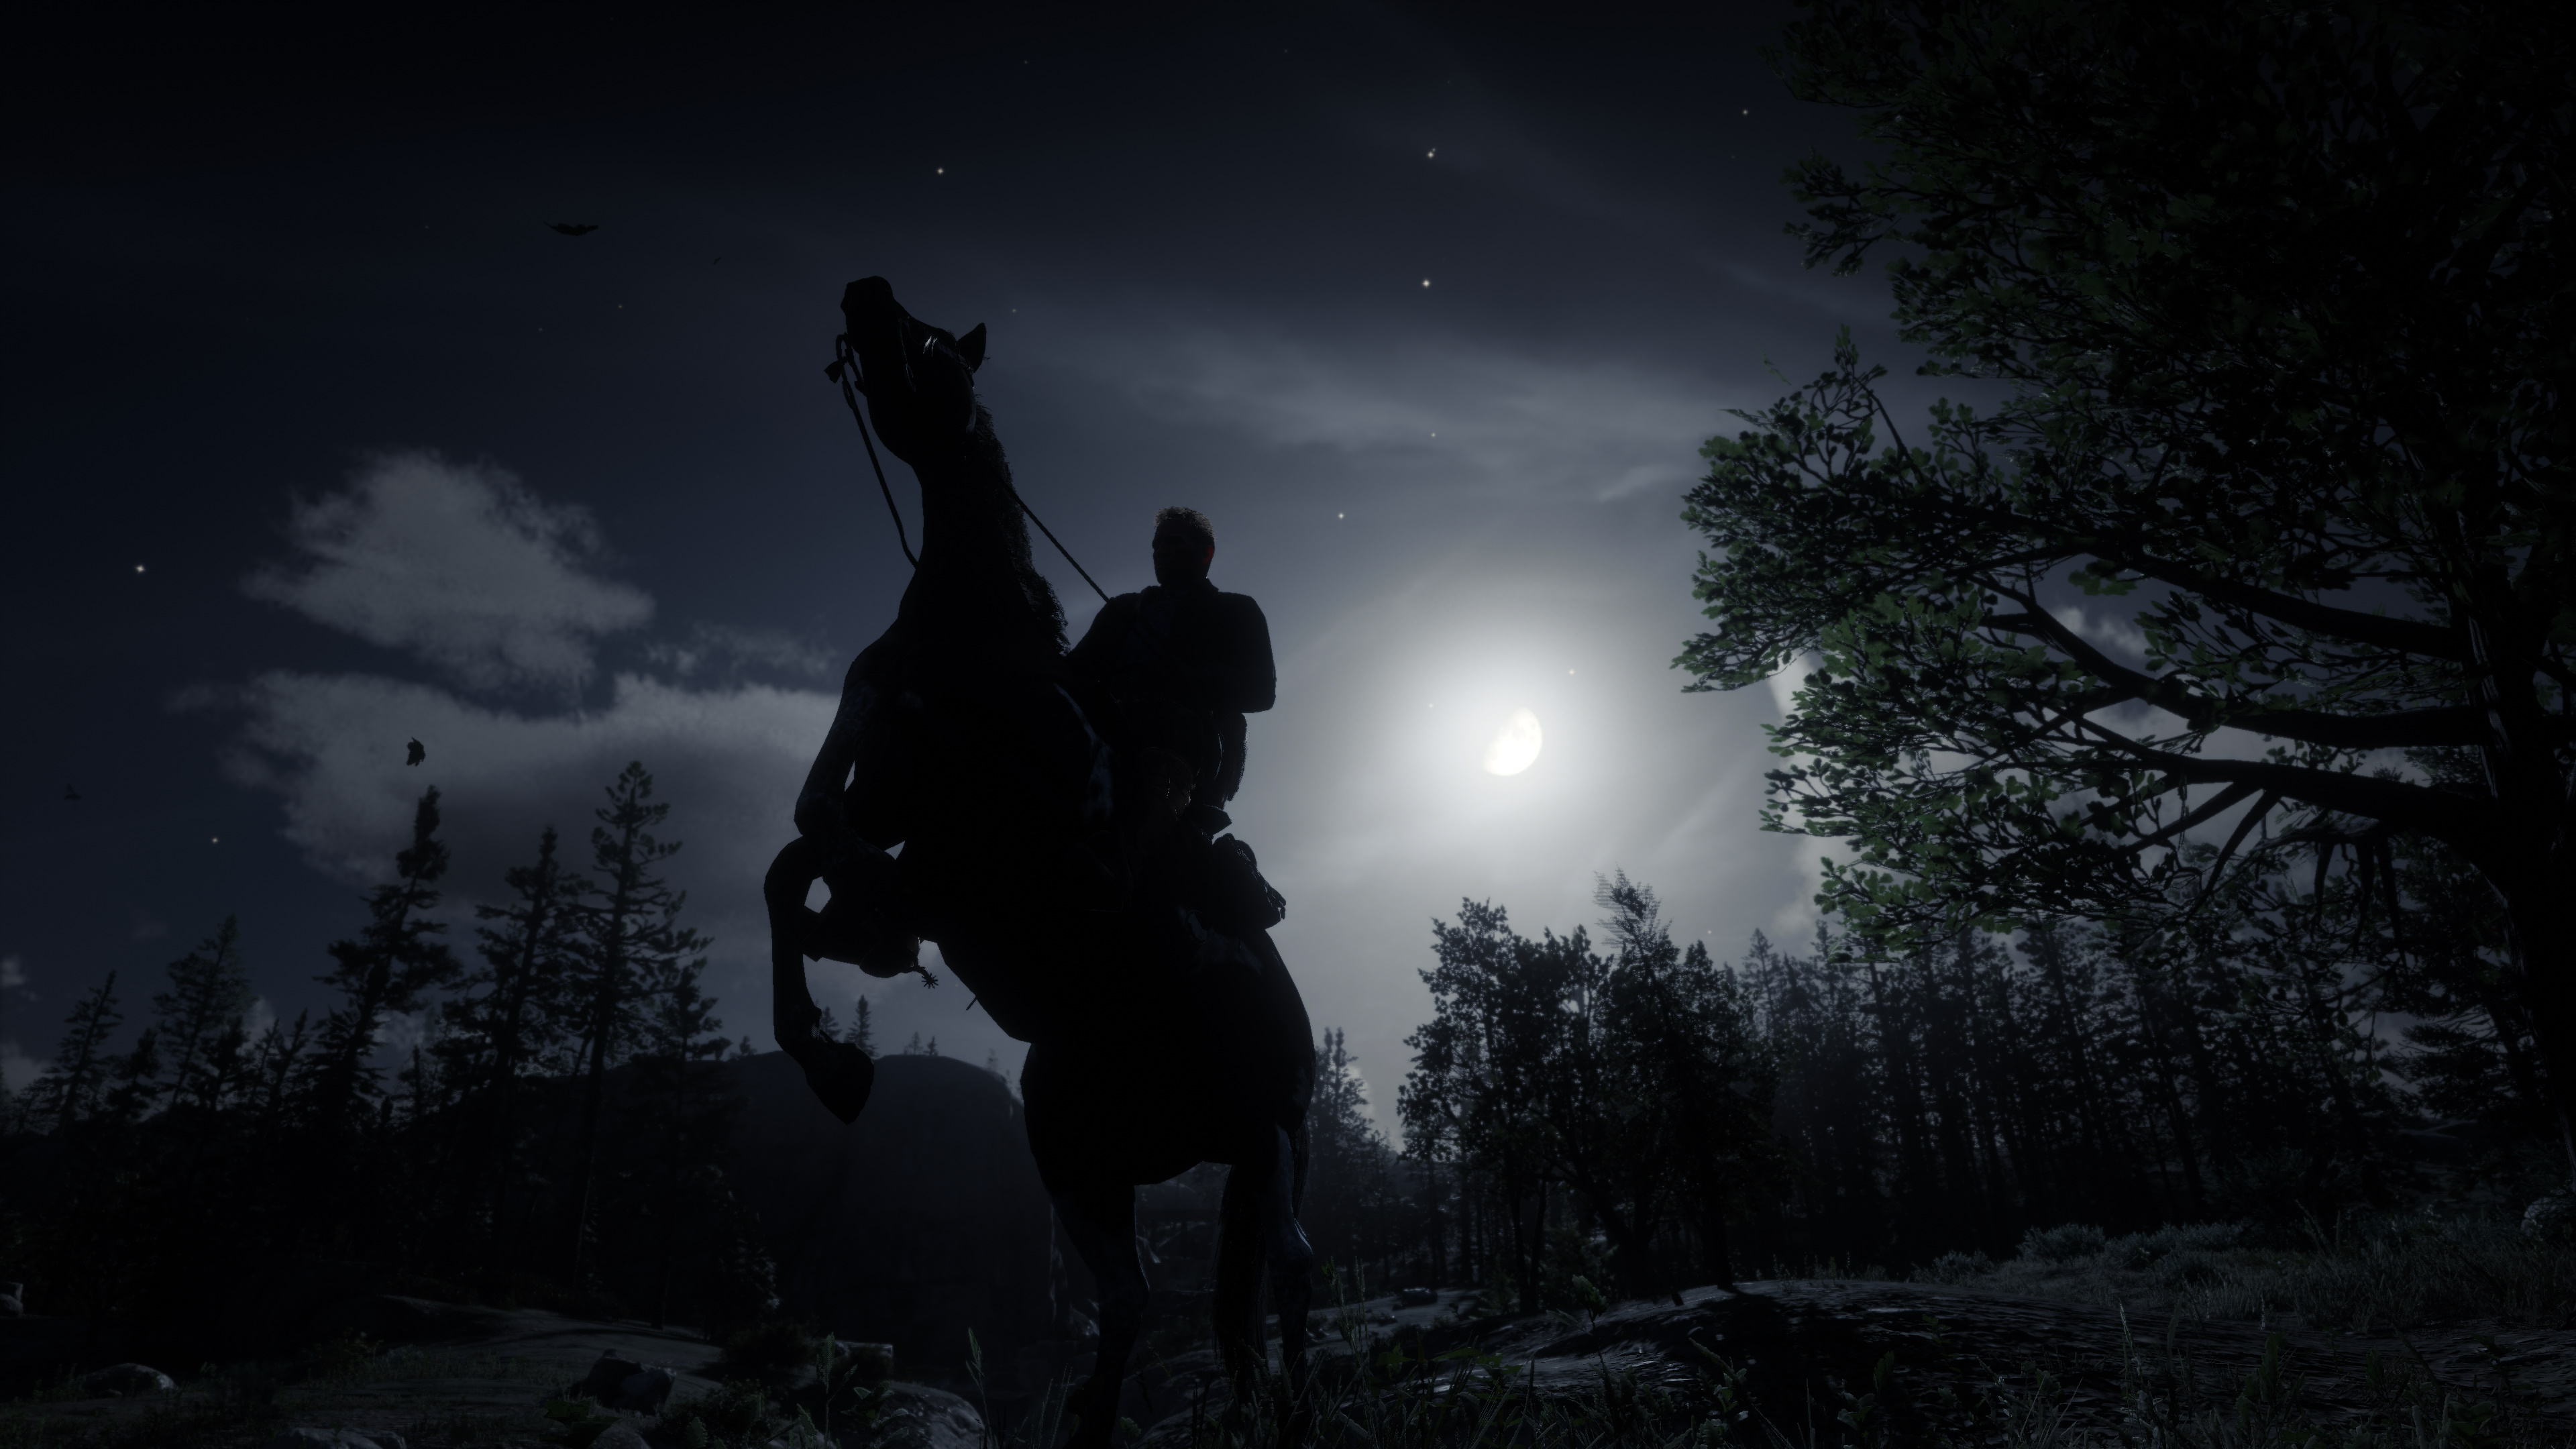 Download Nighttime Red Dead Redemption Ii Phone Wallpaper